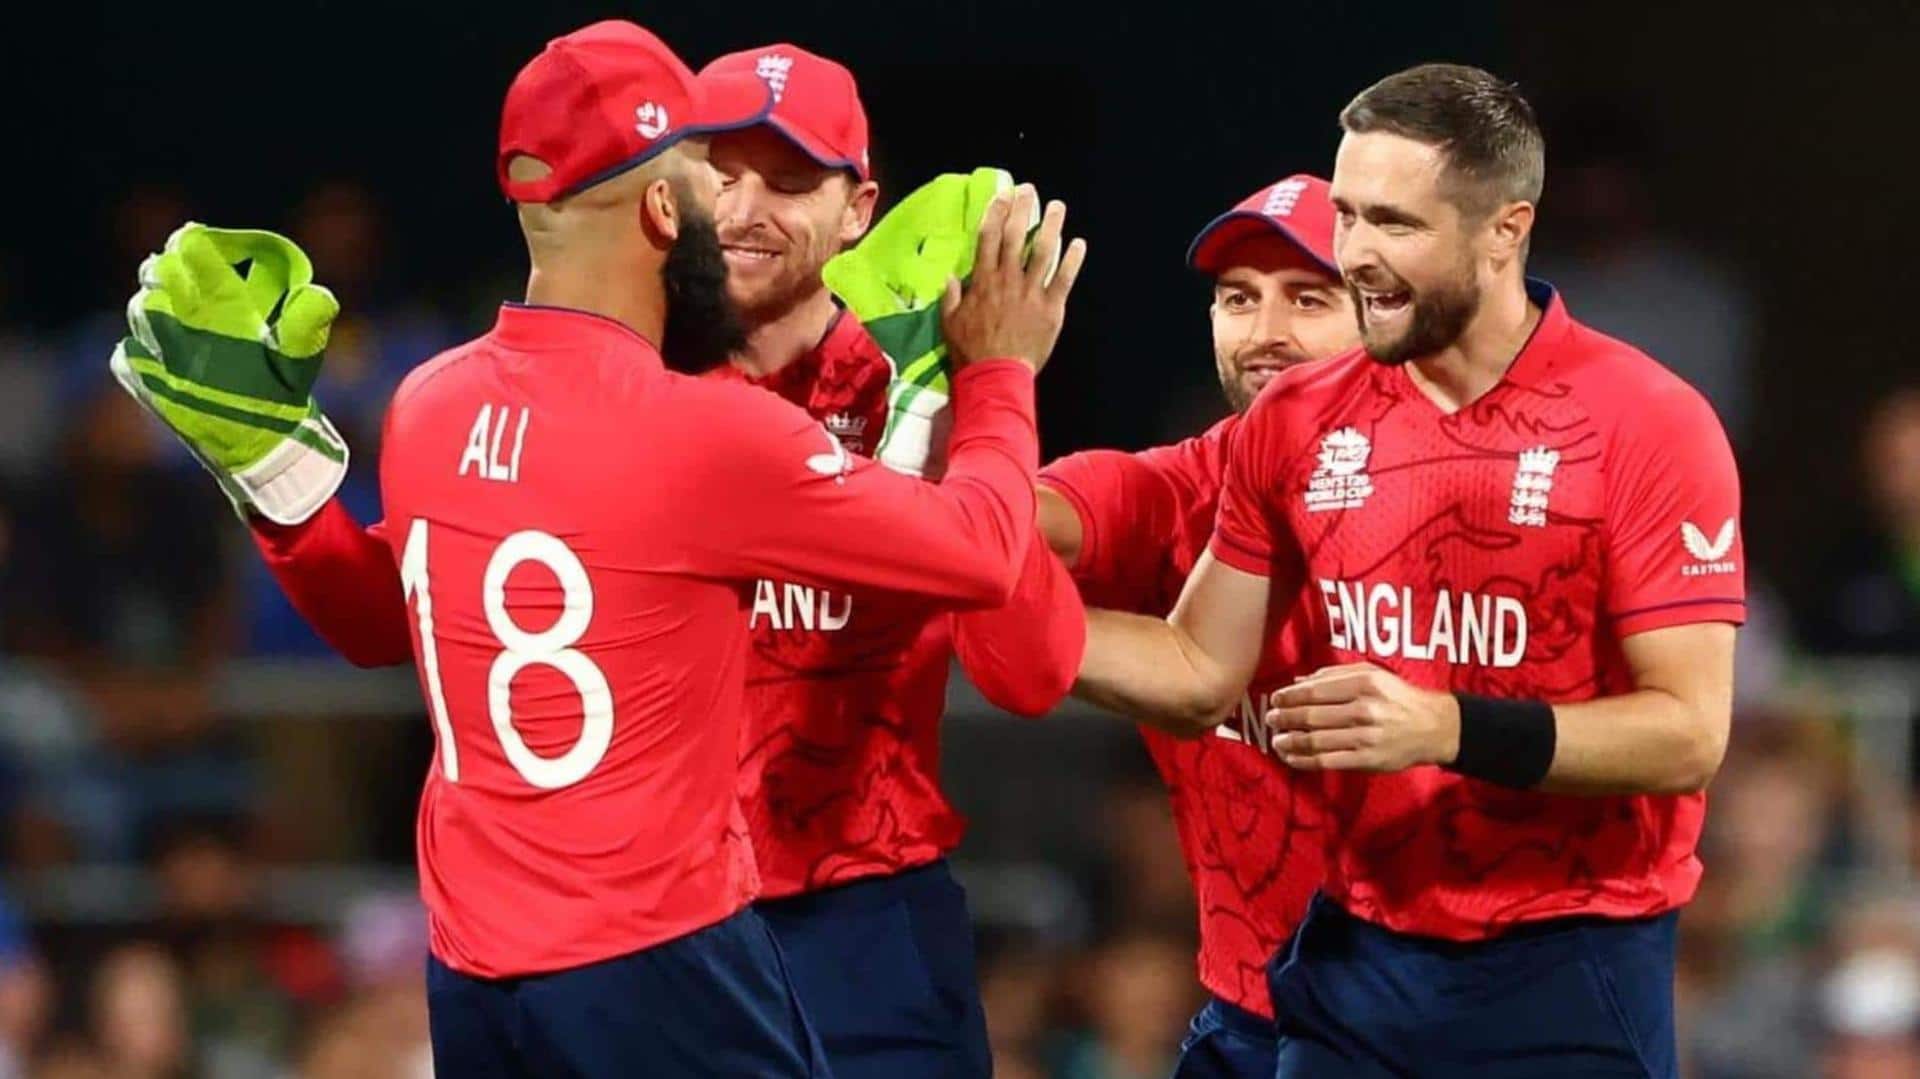 2022 T20 World Cup: England reach semi-finals; Australia ousted